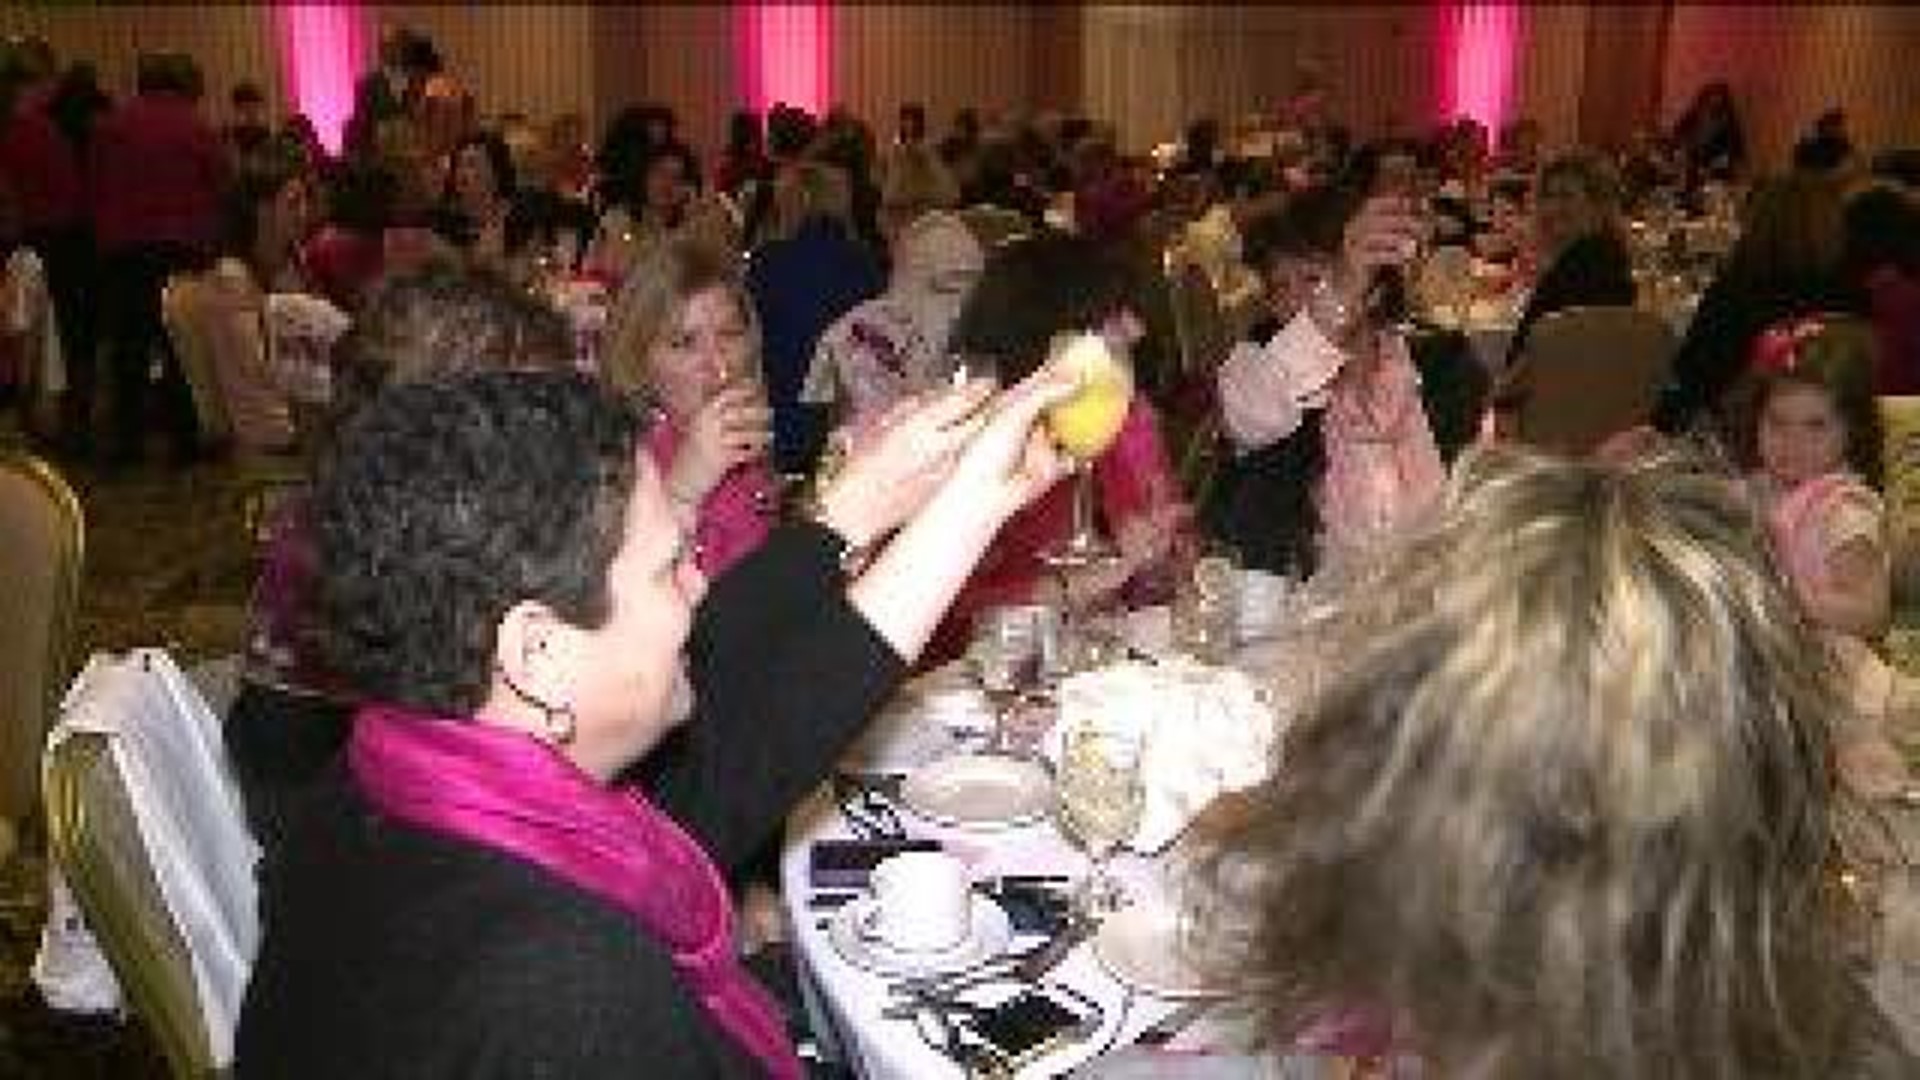 People Strut Their Stuff to Fight Cancer